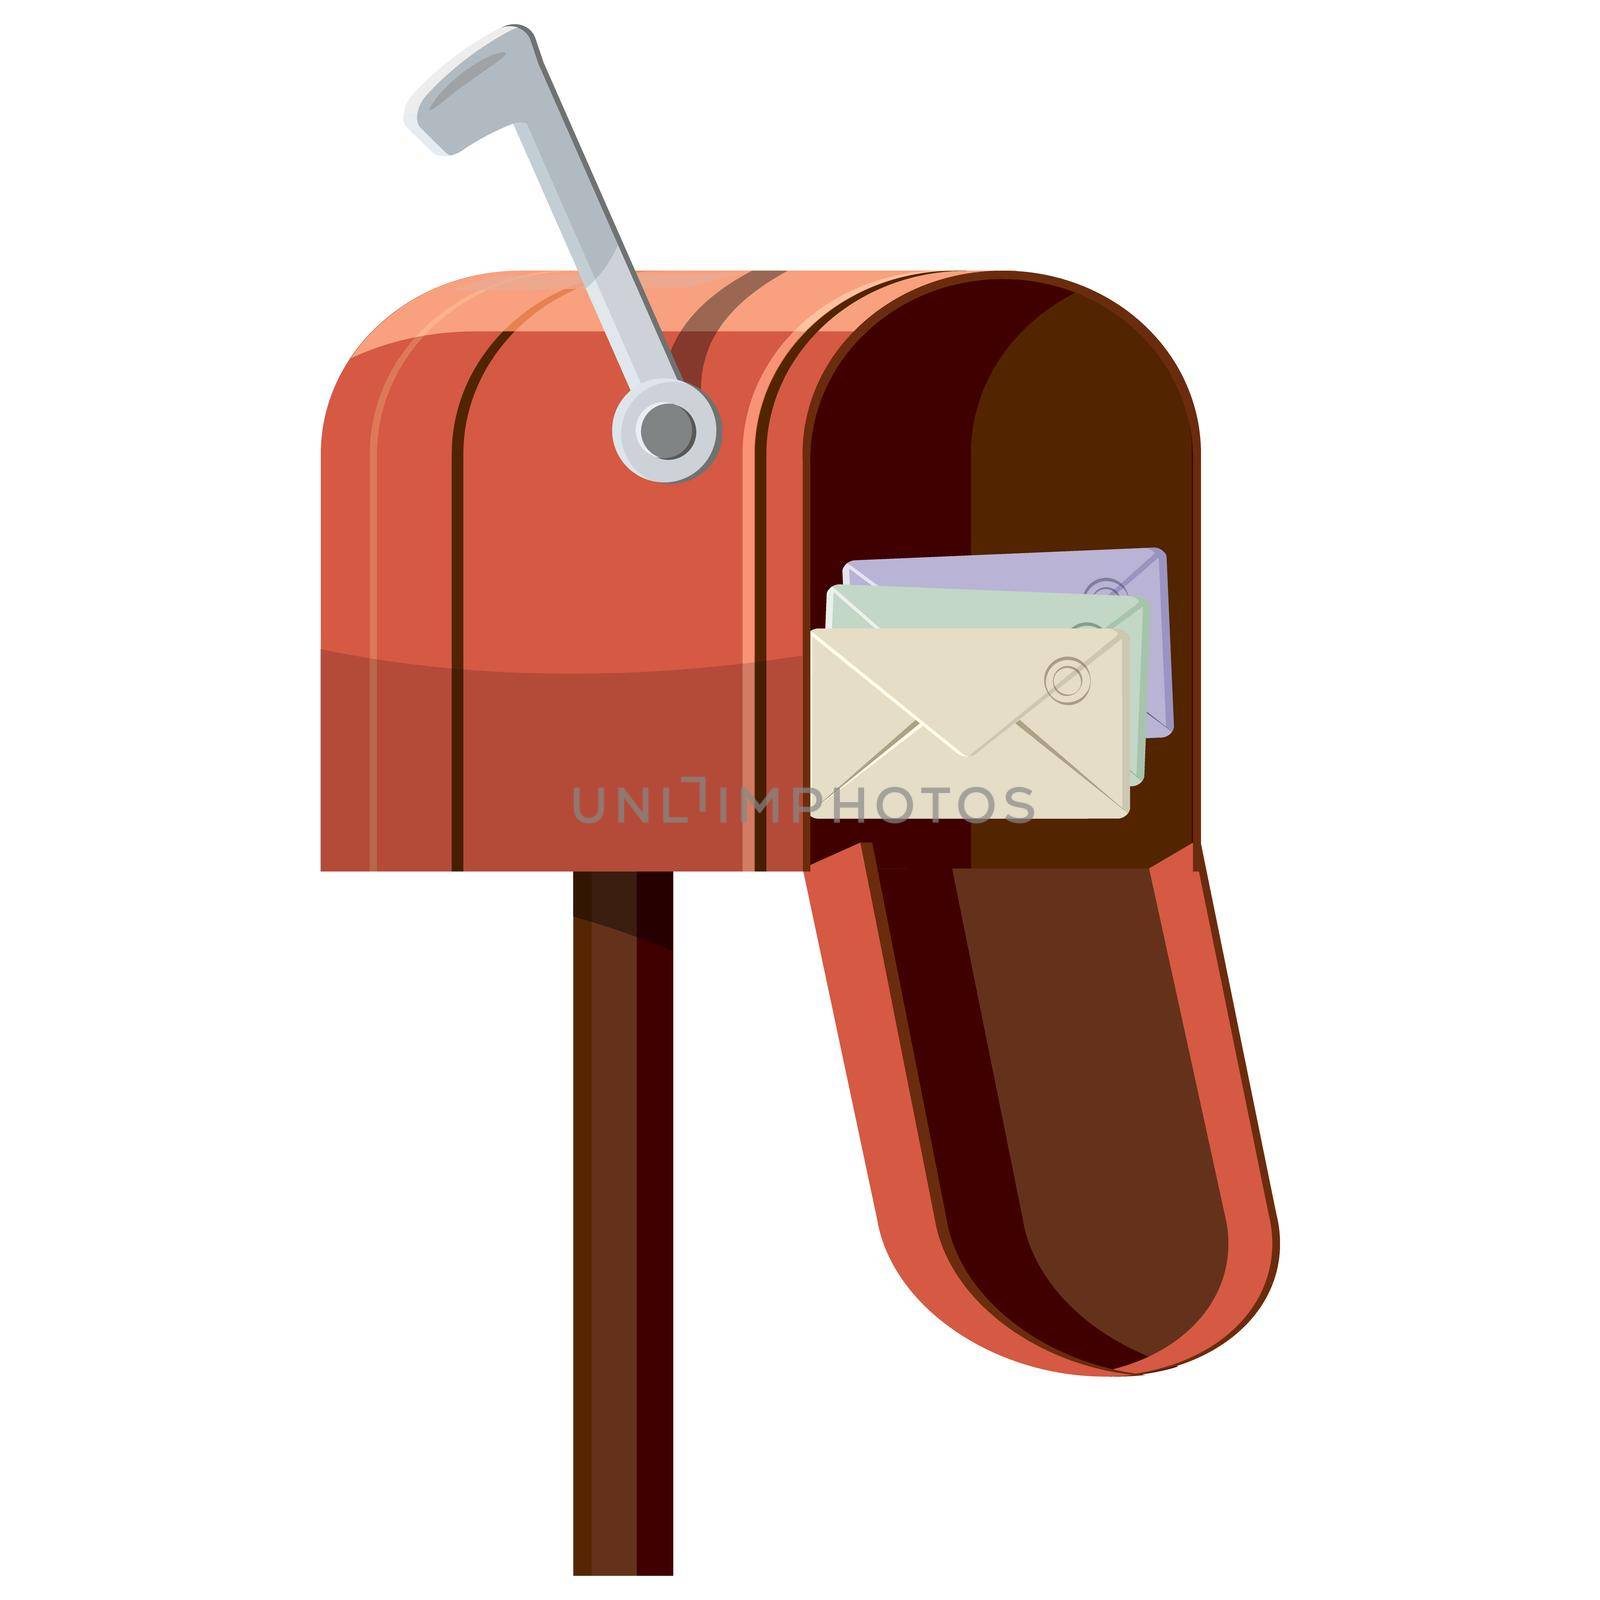 Mailbox icon, cartoon style by ylivdesign